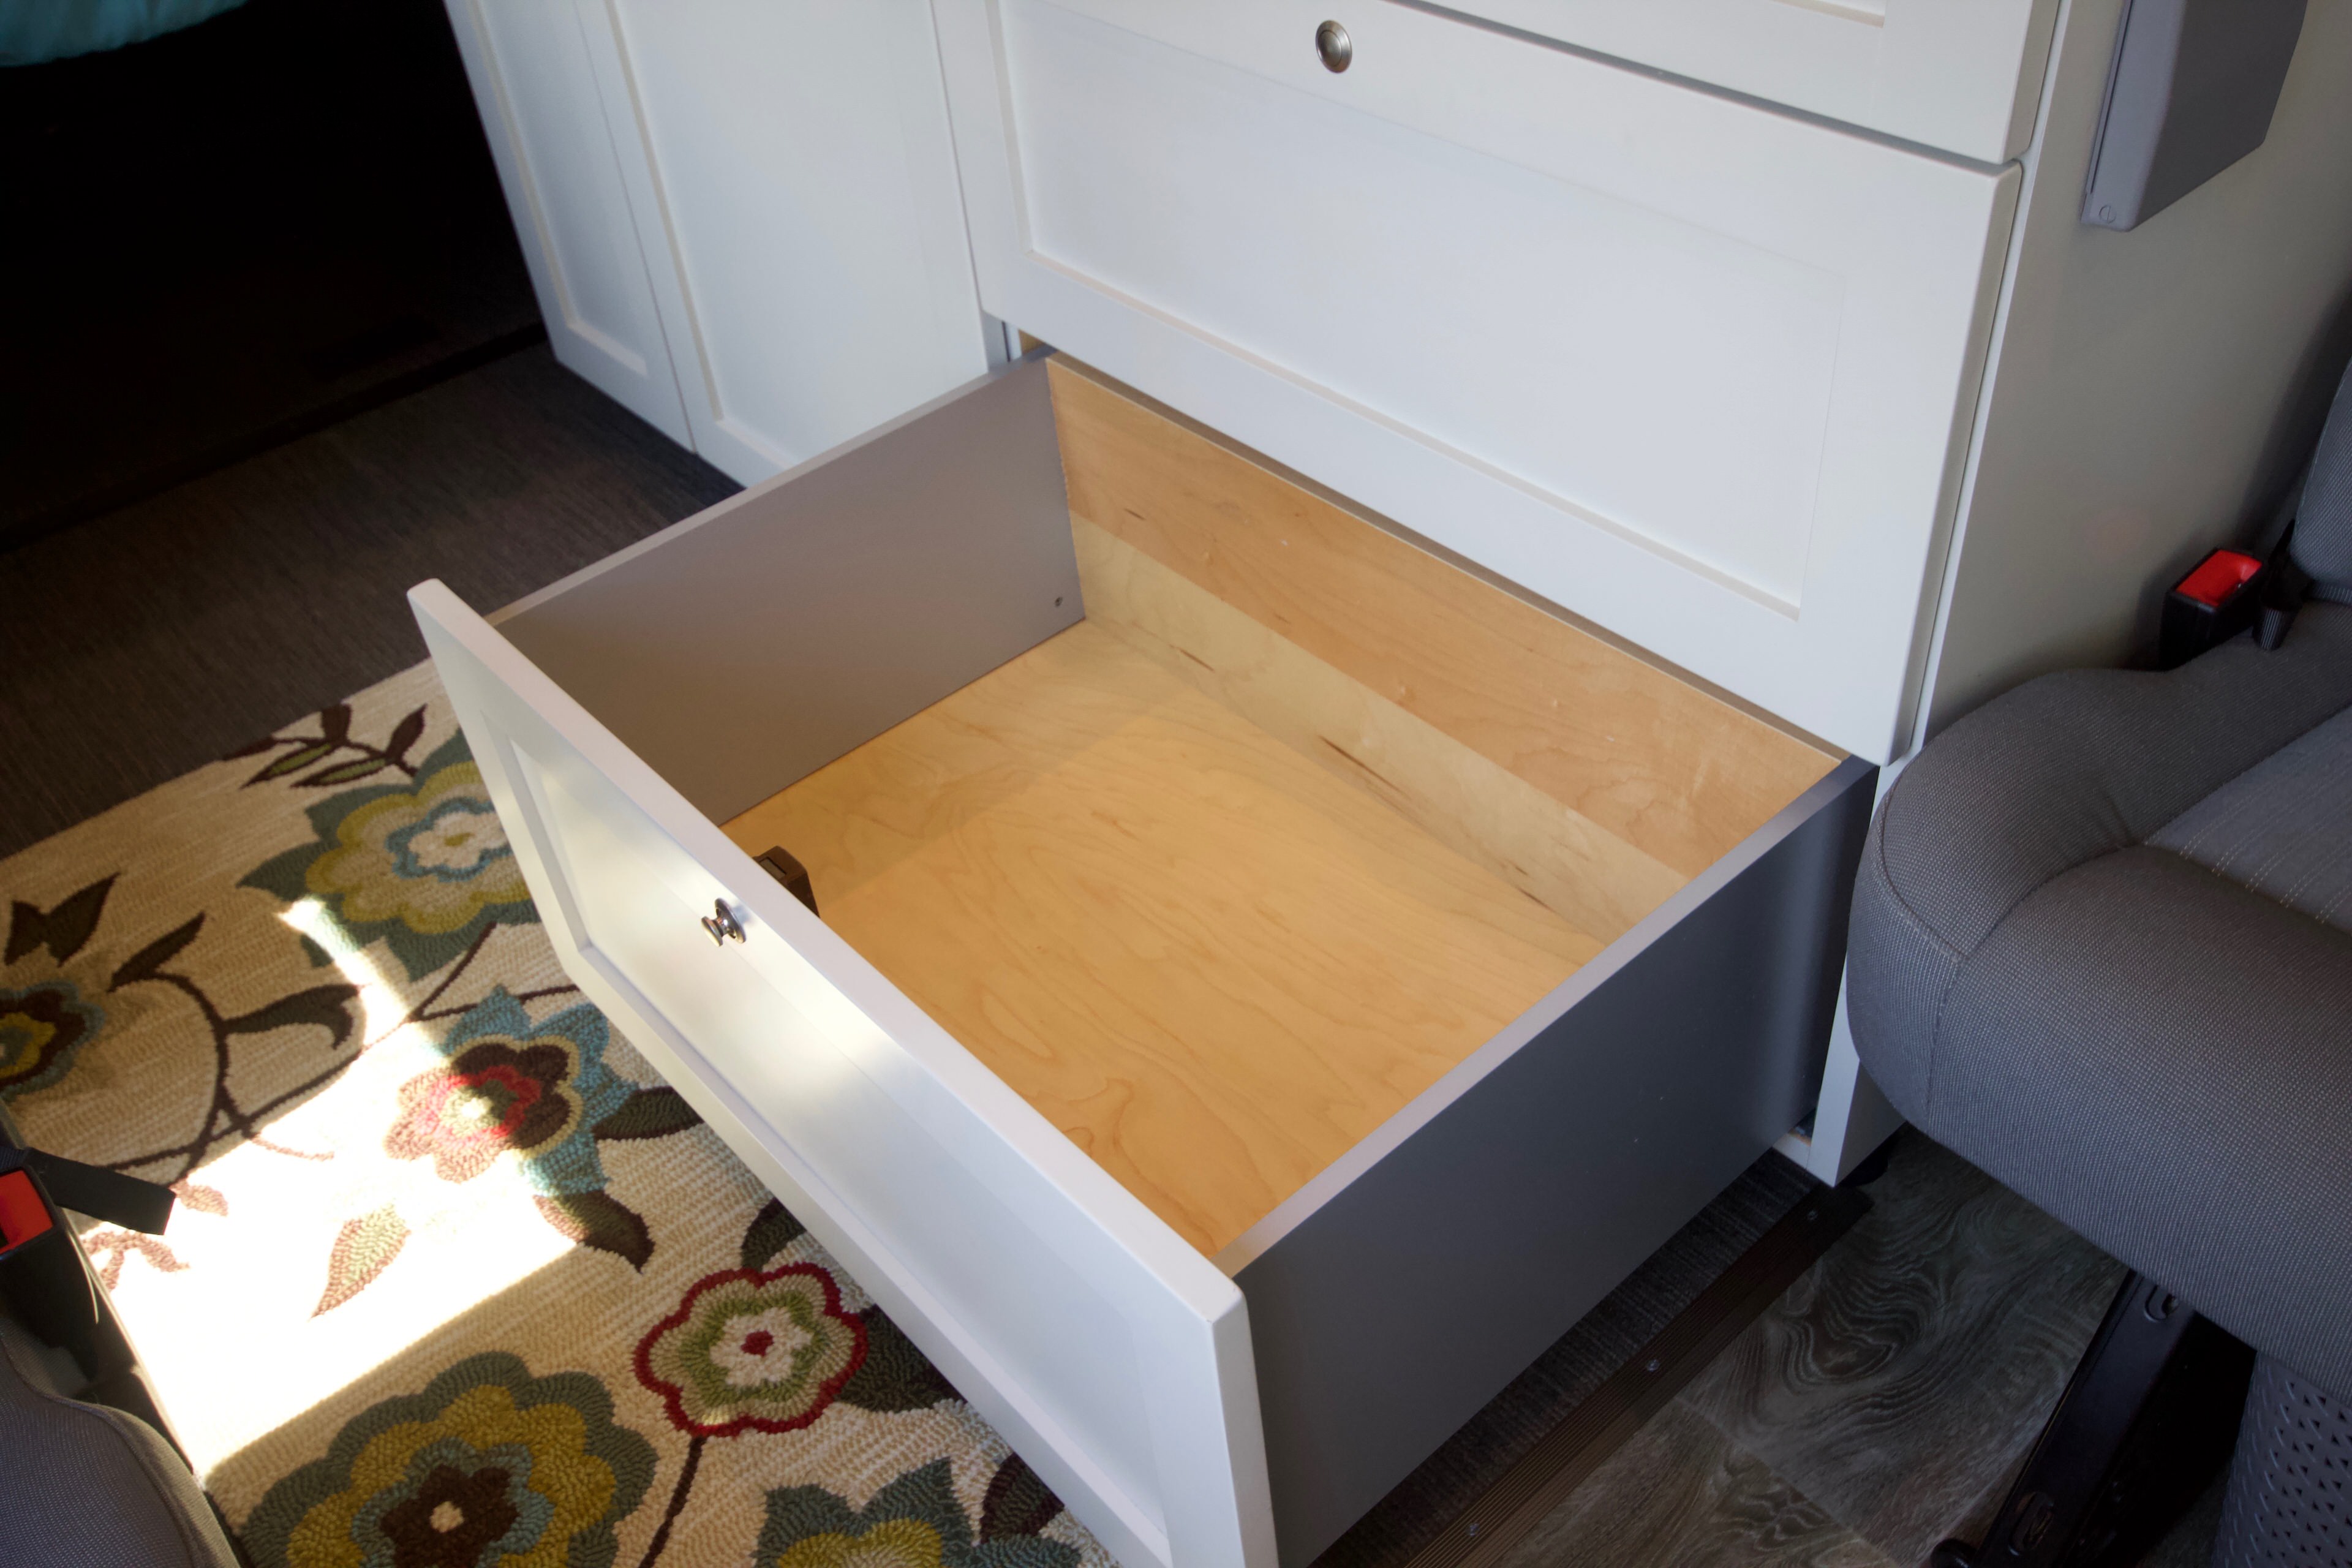 Large, deep drawers helpful to store pots and pans